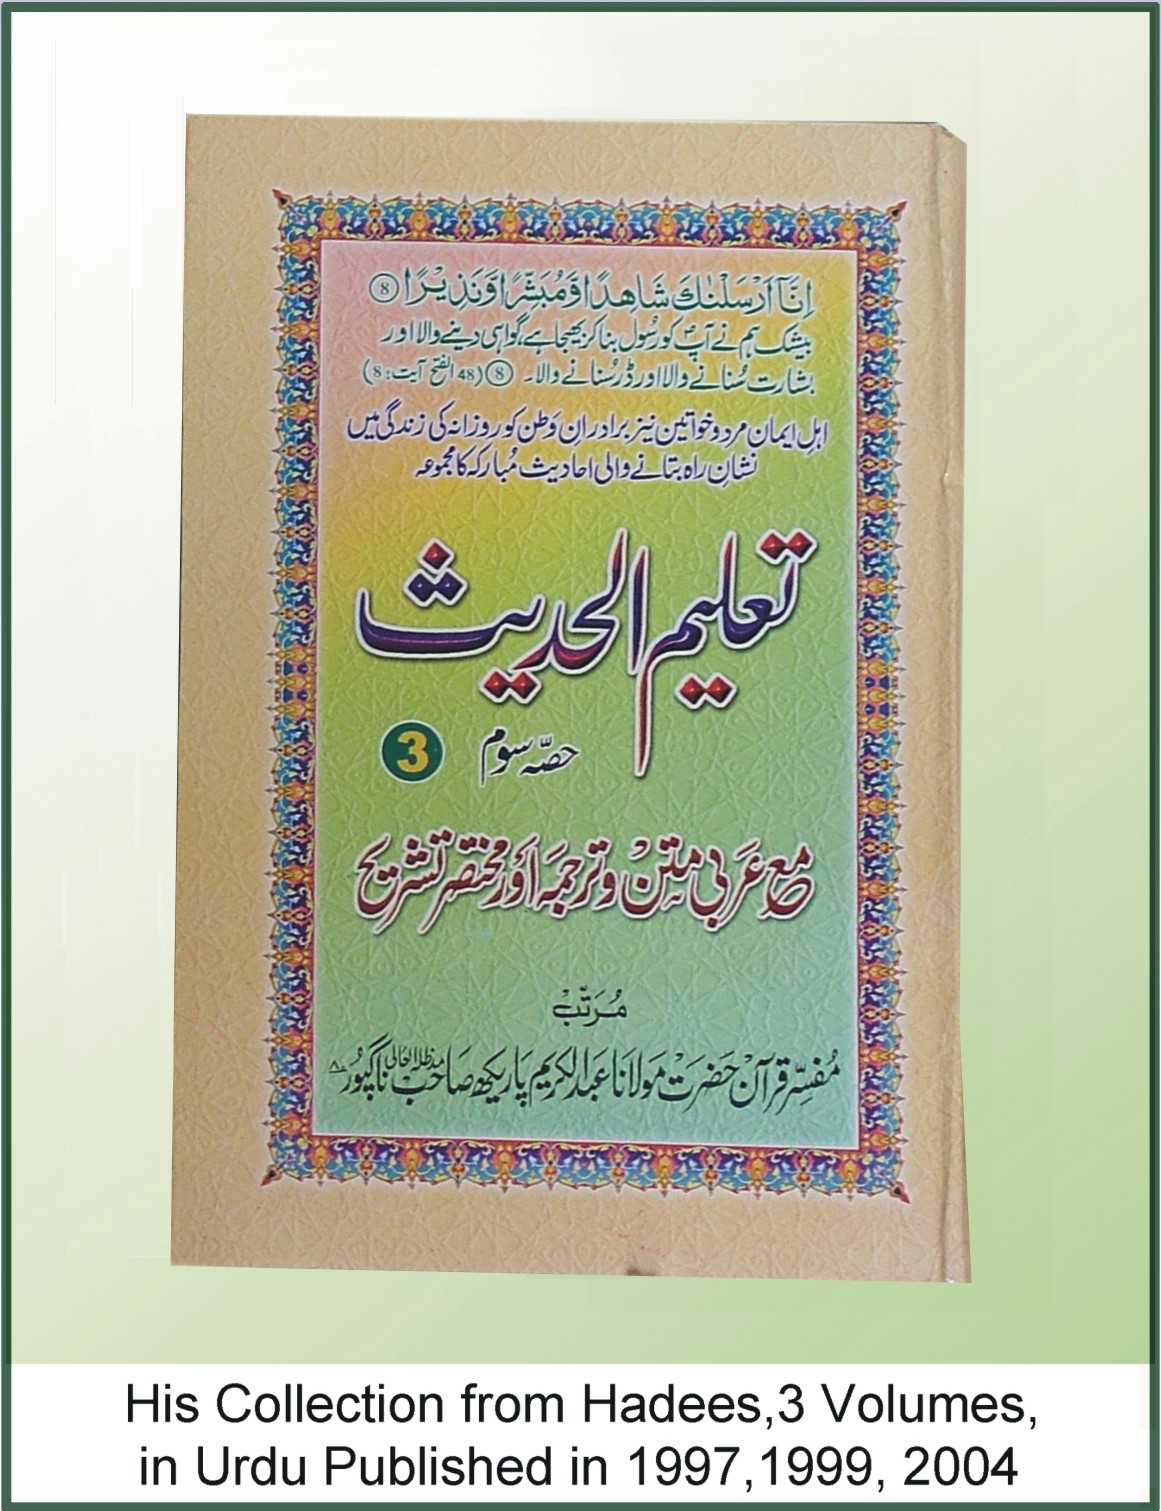 Collection from Hadees, 3 Volumes (Urdu) Published in 1997, 1999 & 2004